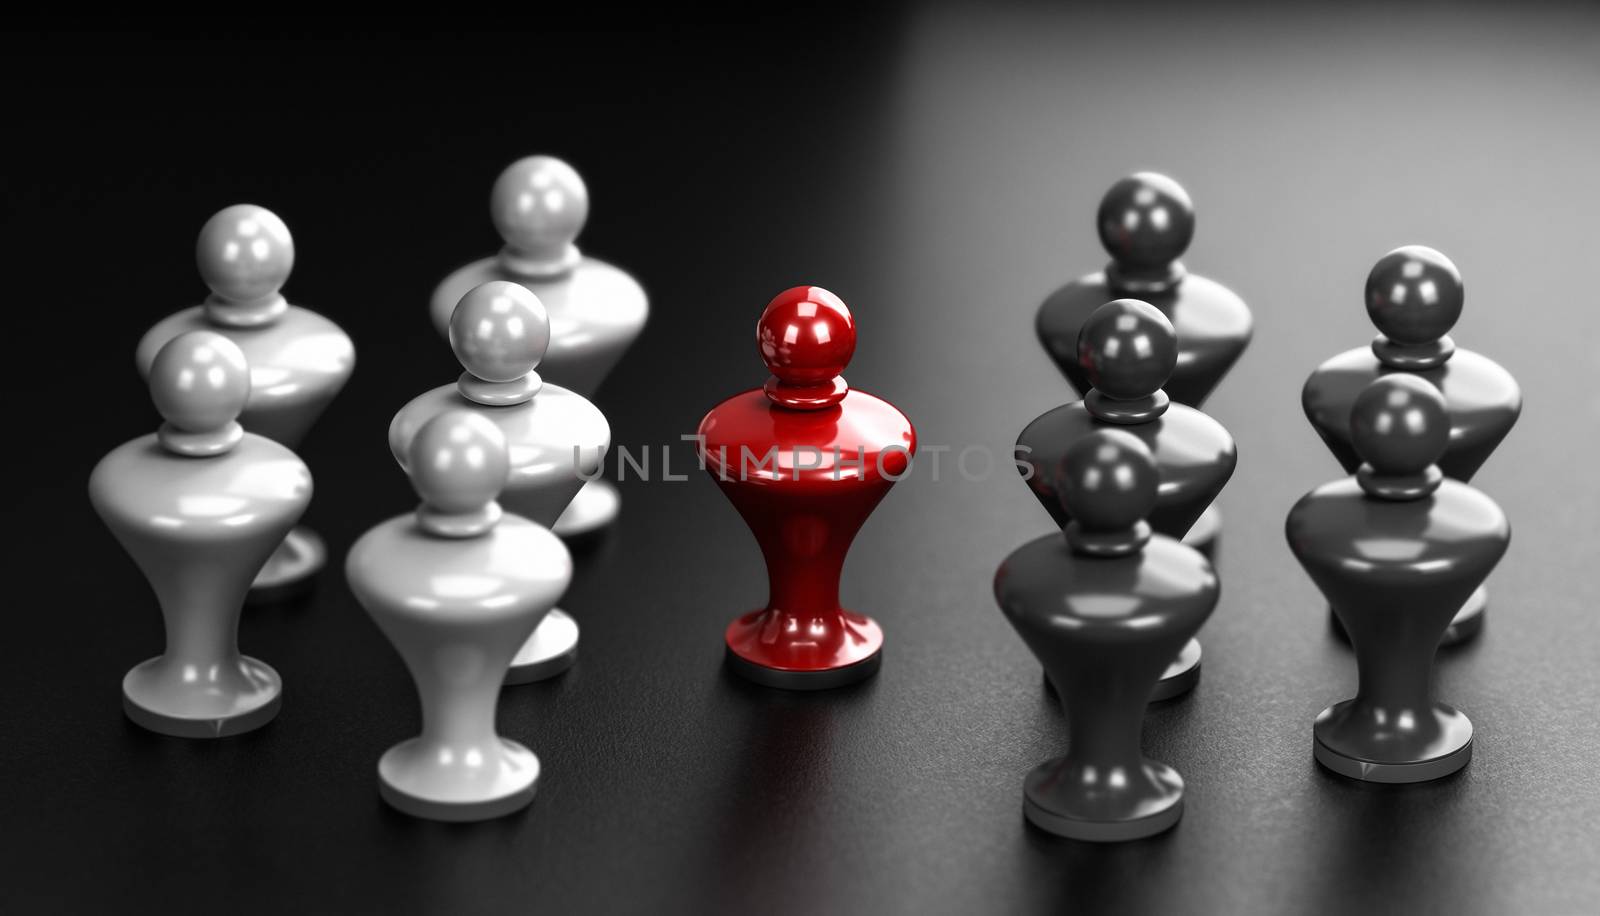 Concept of pawns representing conflict between groups and one me by Olivier-Le-Moal